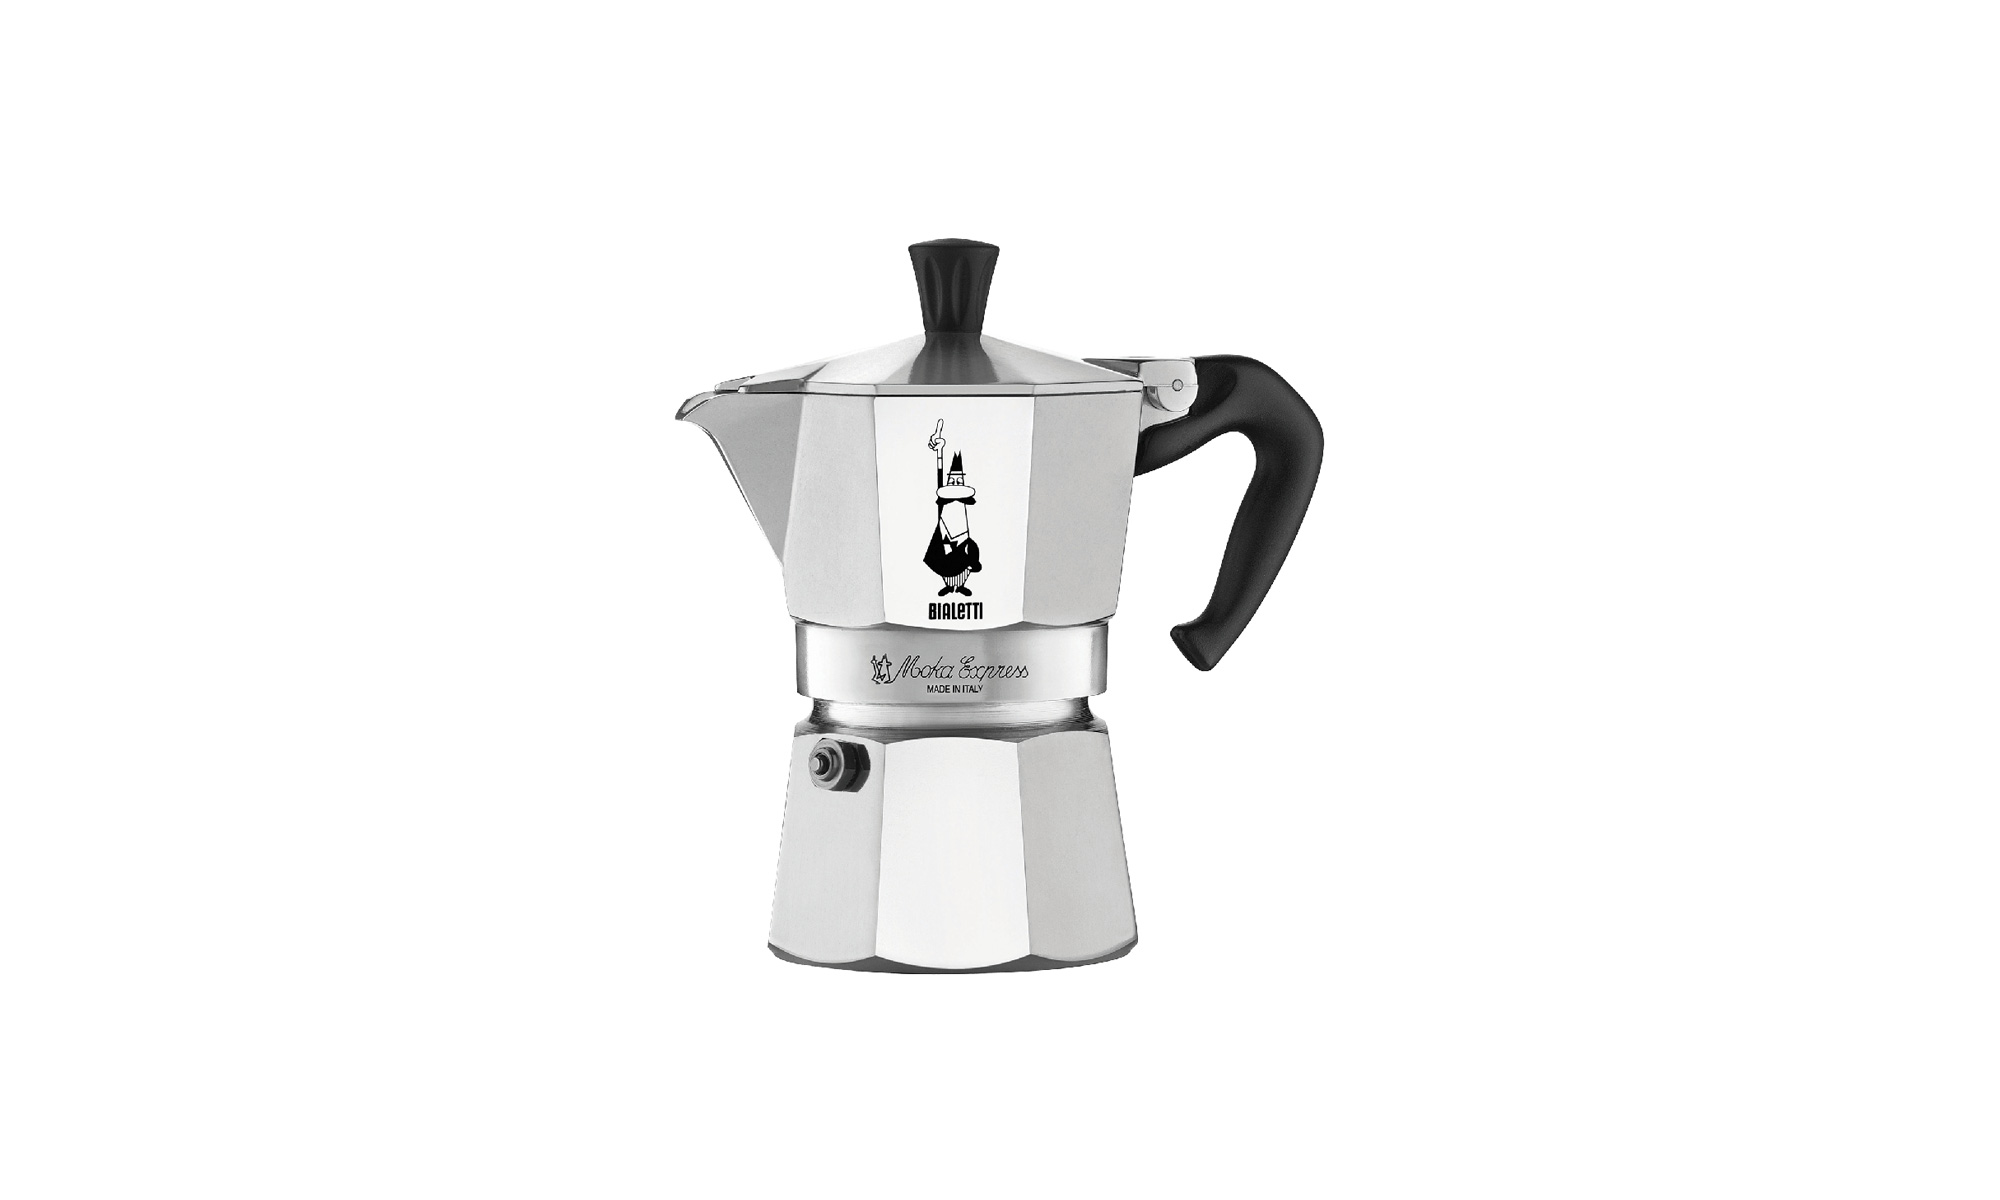 Best-selling stovetop espresso maker on  hailed as 'must have kitchen  tool for the coffee connoisseur